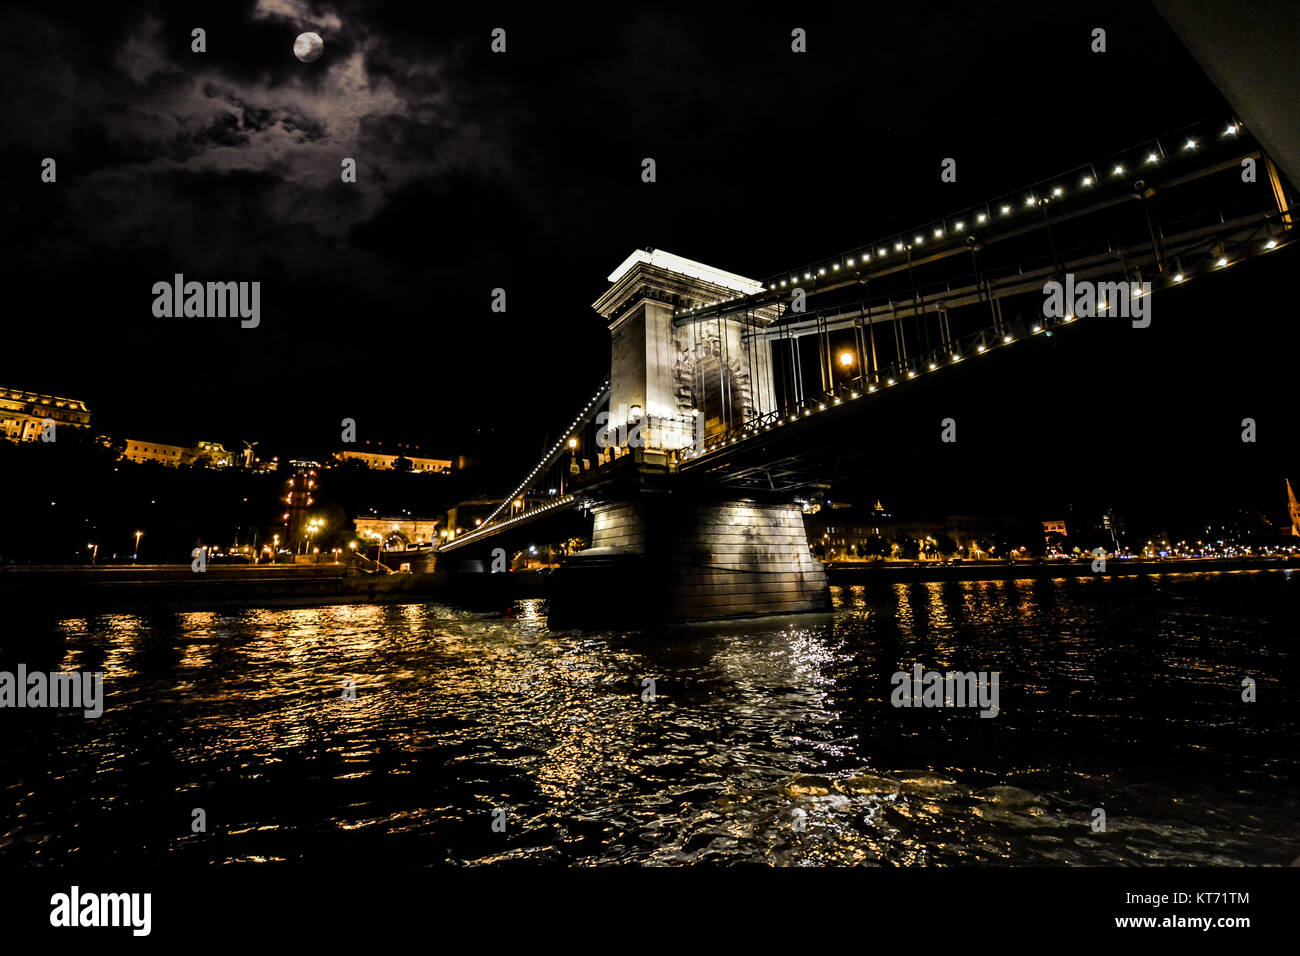 City lights of Budapest from the Danube River under a full moon and with the Chain Bridge lit up at night Stock Photo